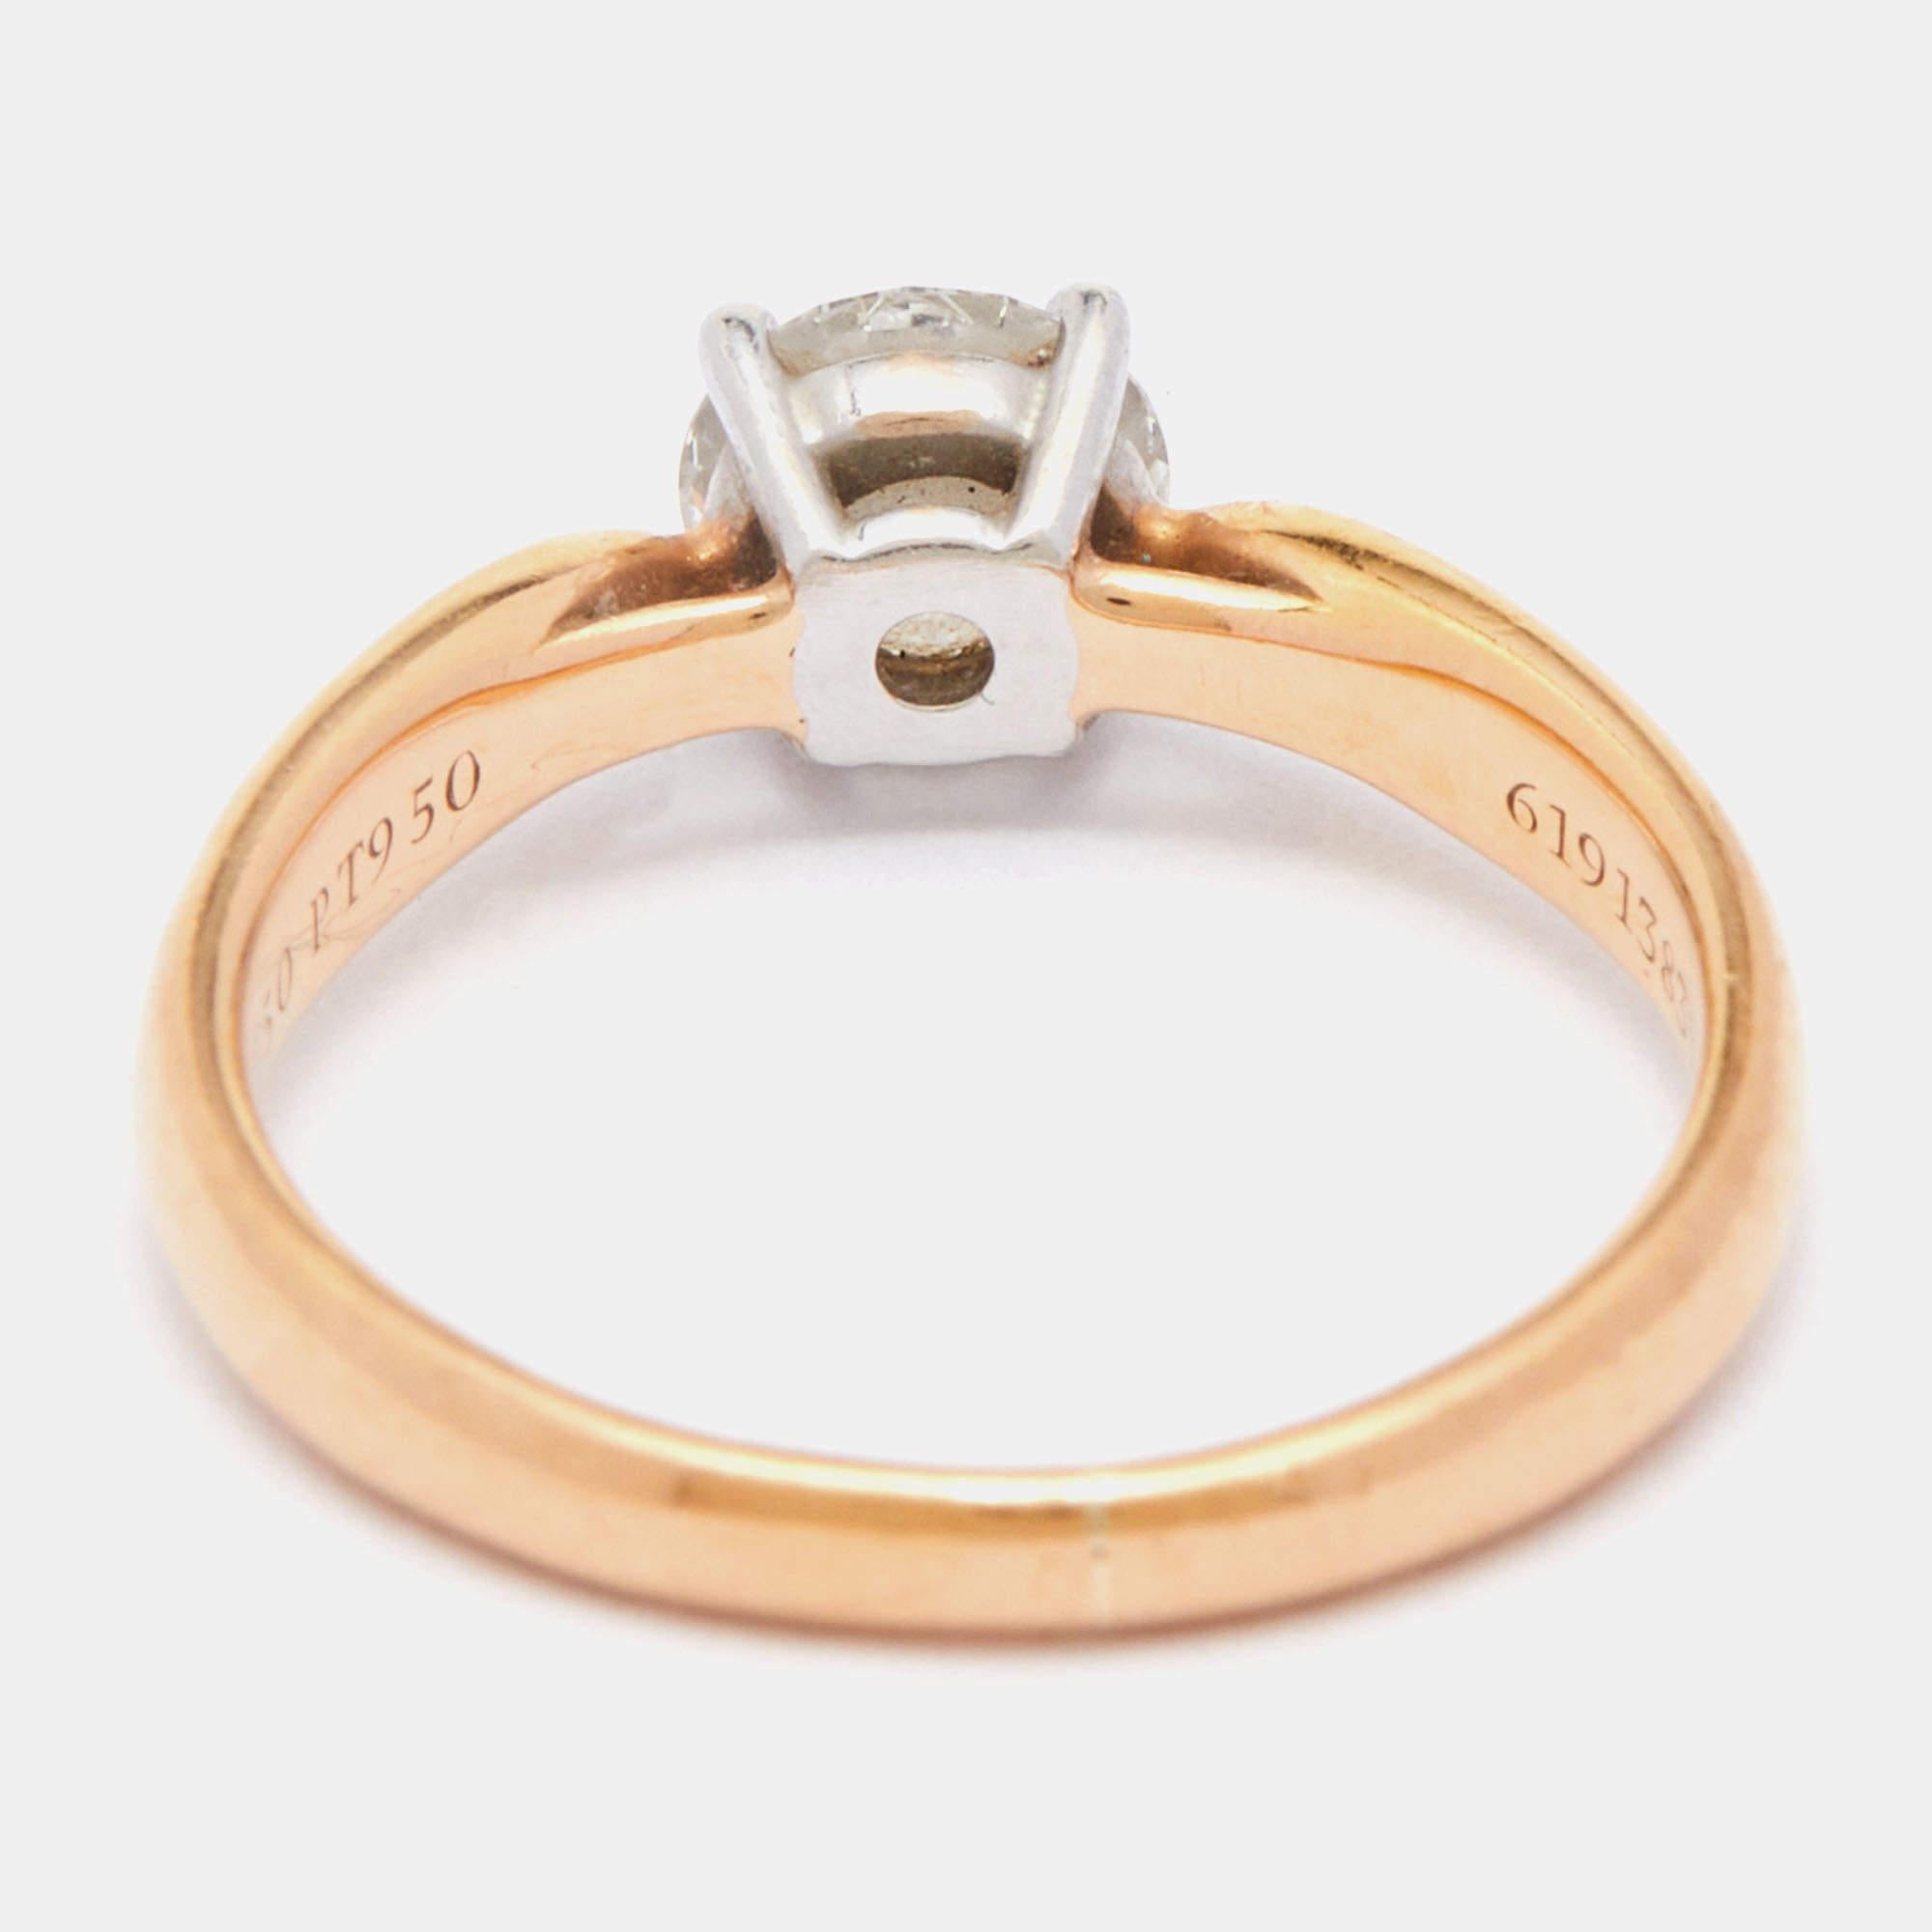 As is Tiffany's tradition to herald a diamond in a magnificent way, this Tiffany Harmony Solitaire ring comes in a romantic design, with a 0.50 ct G/VS2 diamond set on a four-prong setting. The band is in 18k rose gold, and the diamond is held by